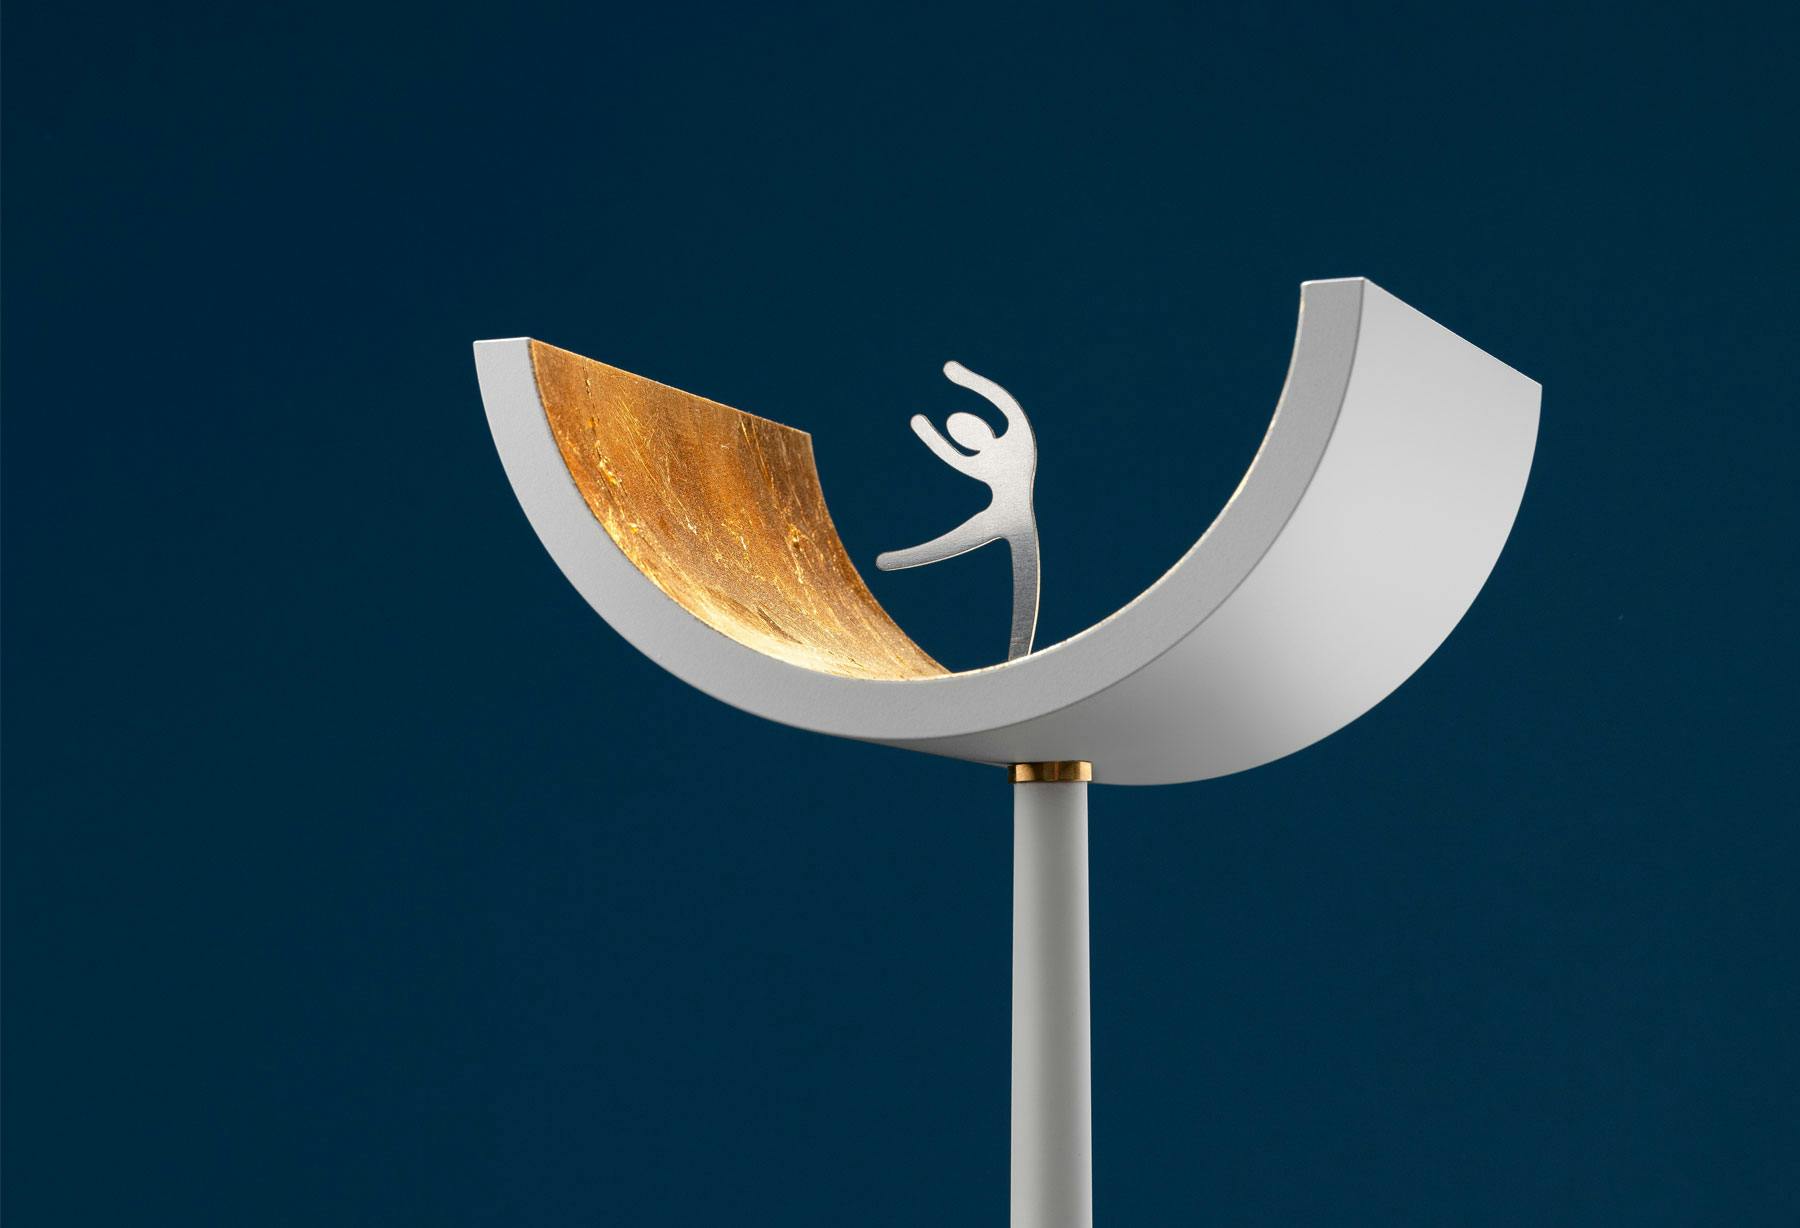 <p>“U” lamp selected for one of the most renowned international awards for design excellence, and displayed in Athens at the “The Annual Good Design Show 2021”</p>
